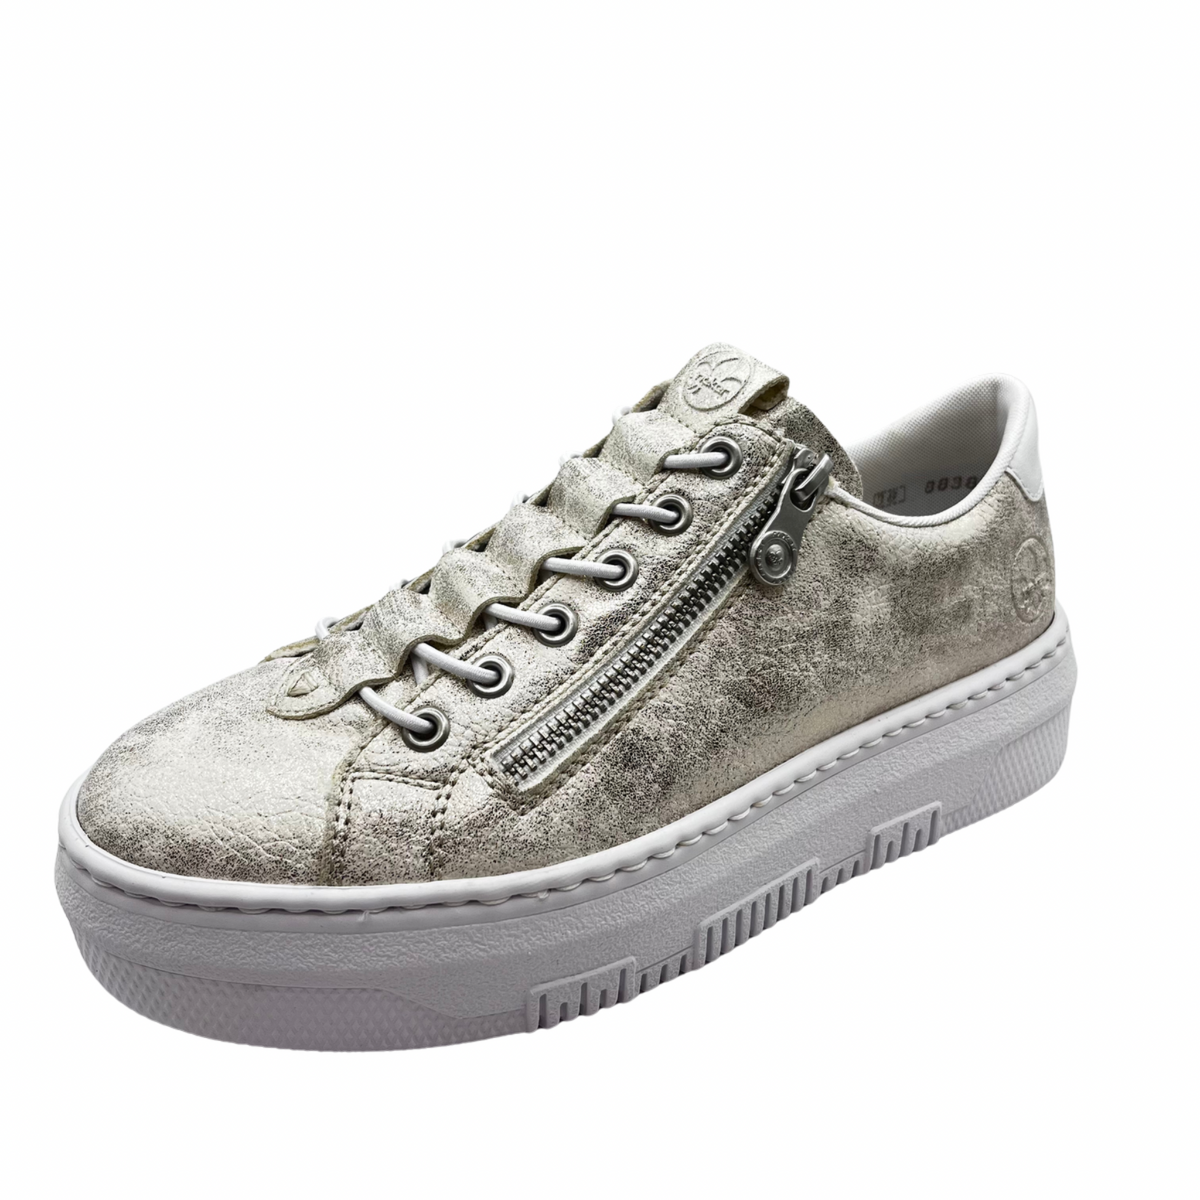 Rieker White and Gold Trainer